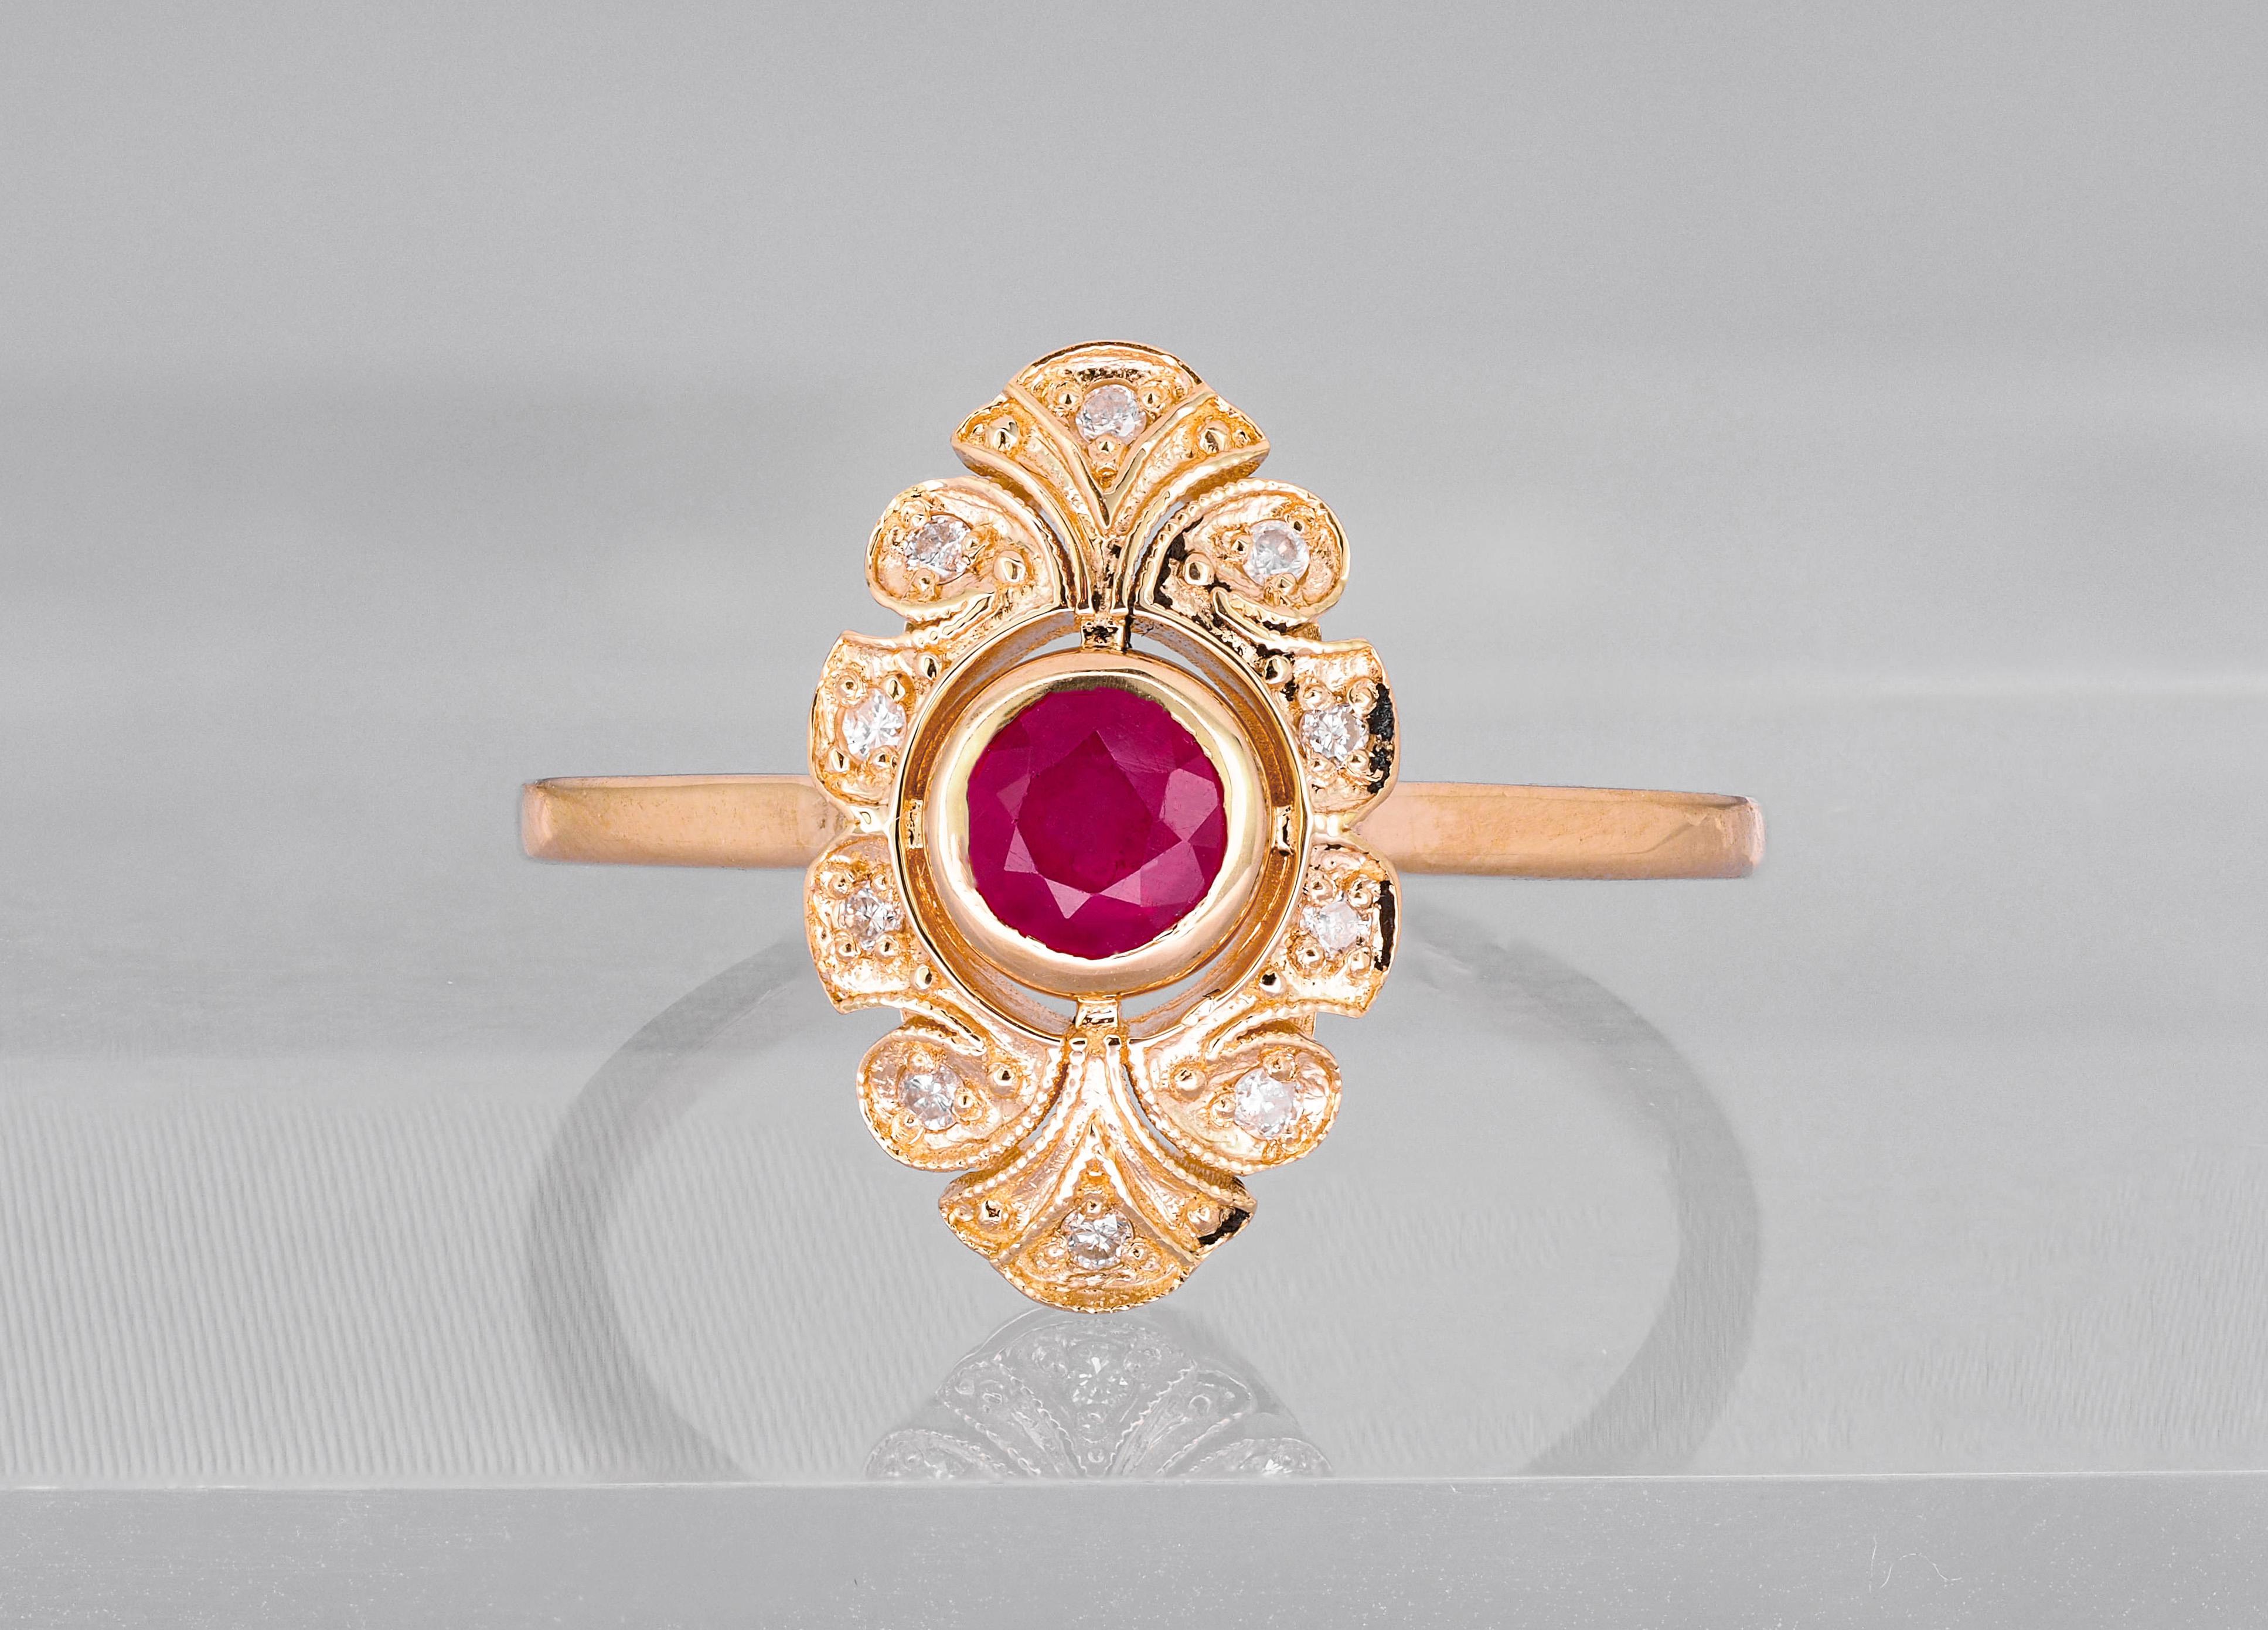 For Sale:  14 karat Gold Ring with Ruby and Diamonds, Vintage Inspired Ring.  9